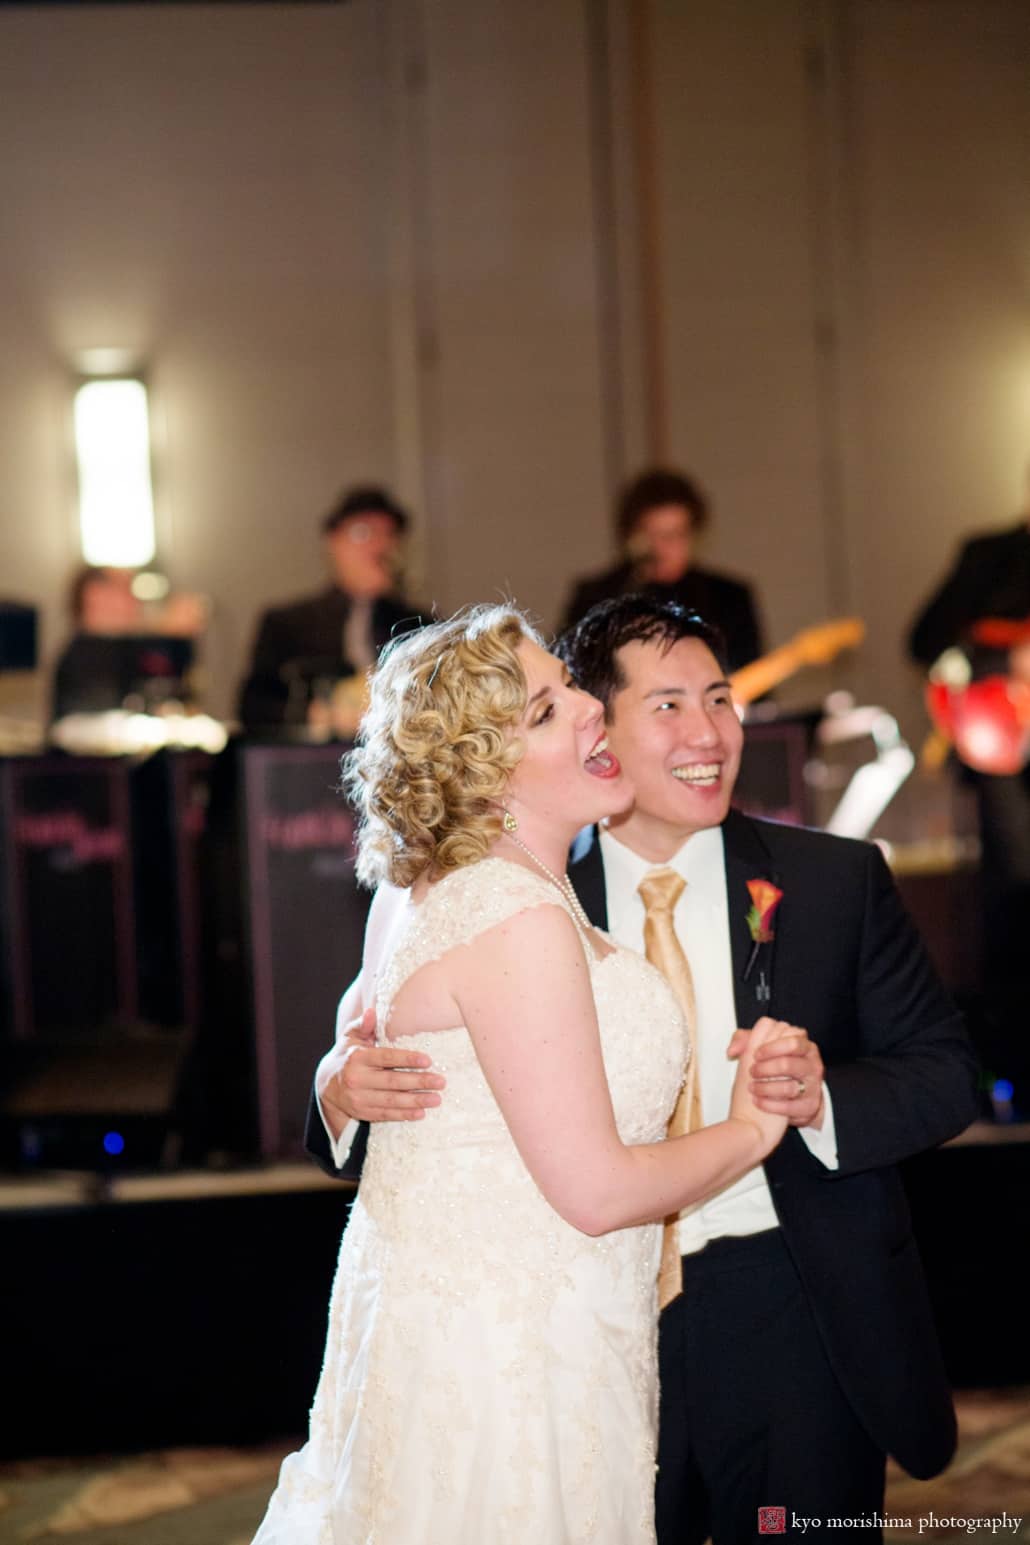 Bride and groom laugh during dance at Westin Forrestal Village wedding, with Franklin and Alison orchestra playing behind them, photographed by Kyo Morishima